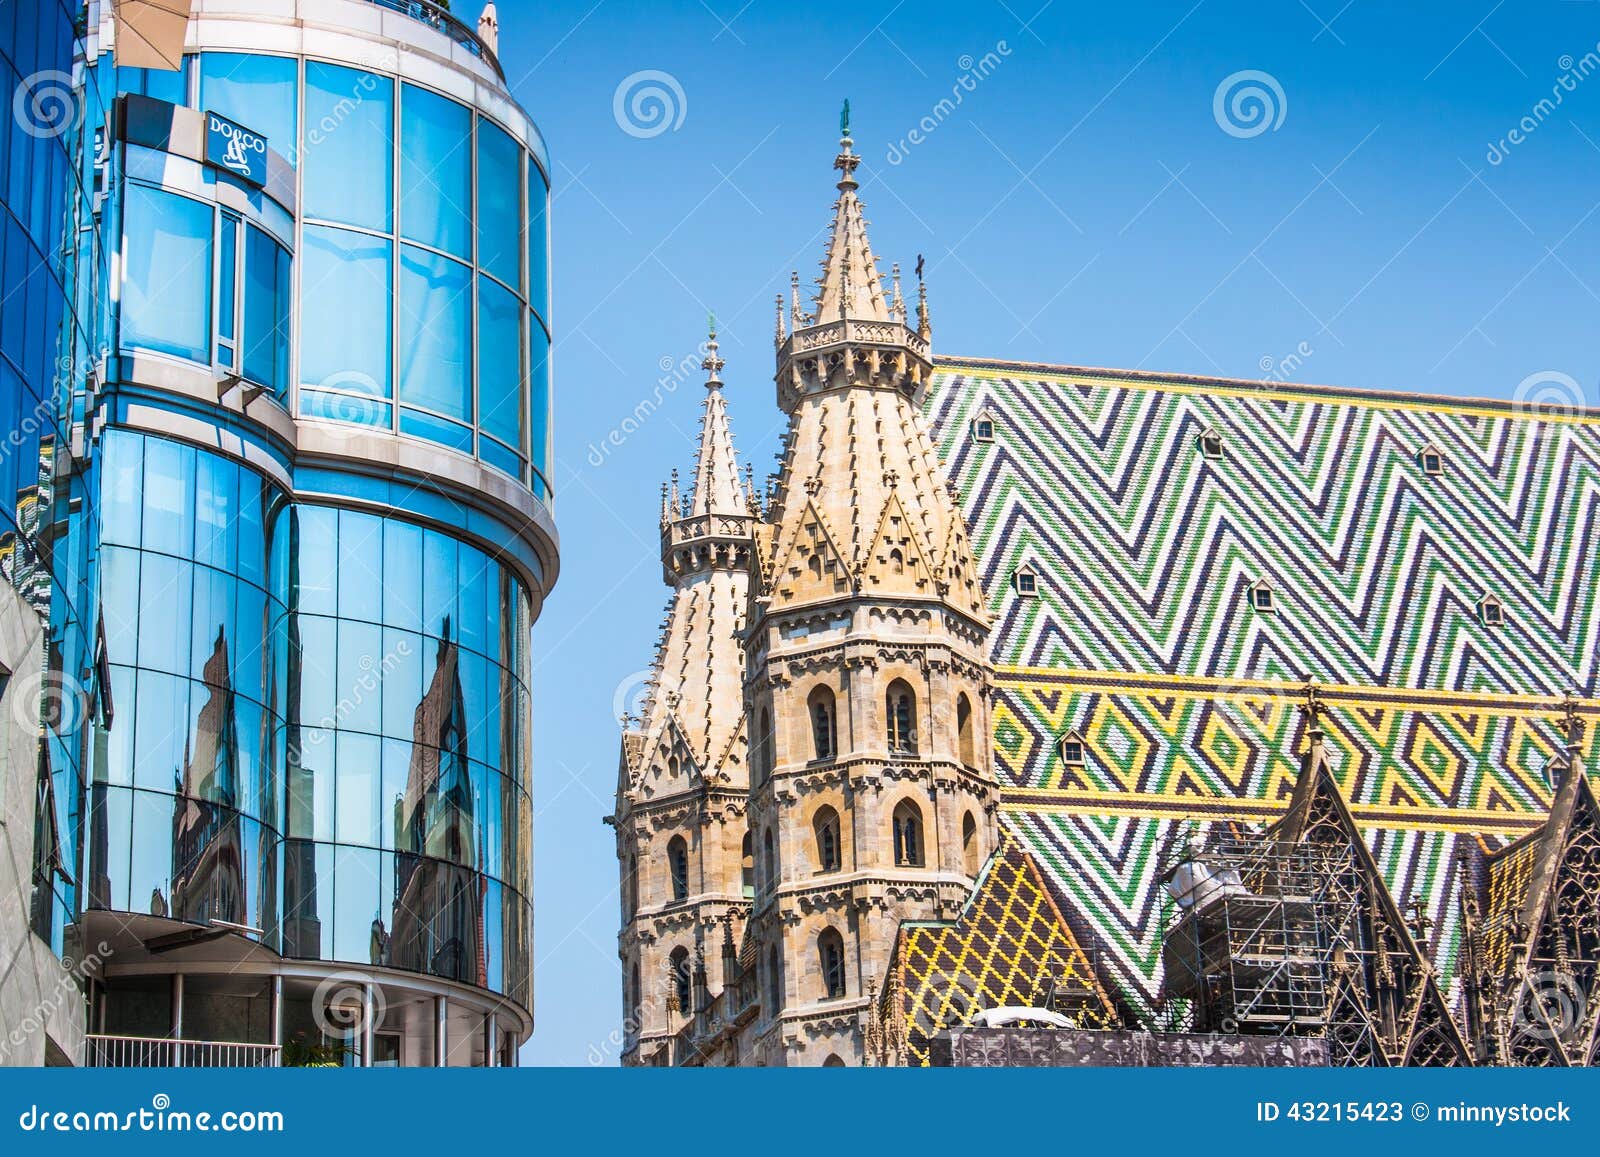 haas haus with st. stephen's cathedral in vienna, austria